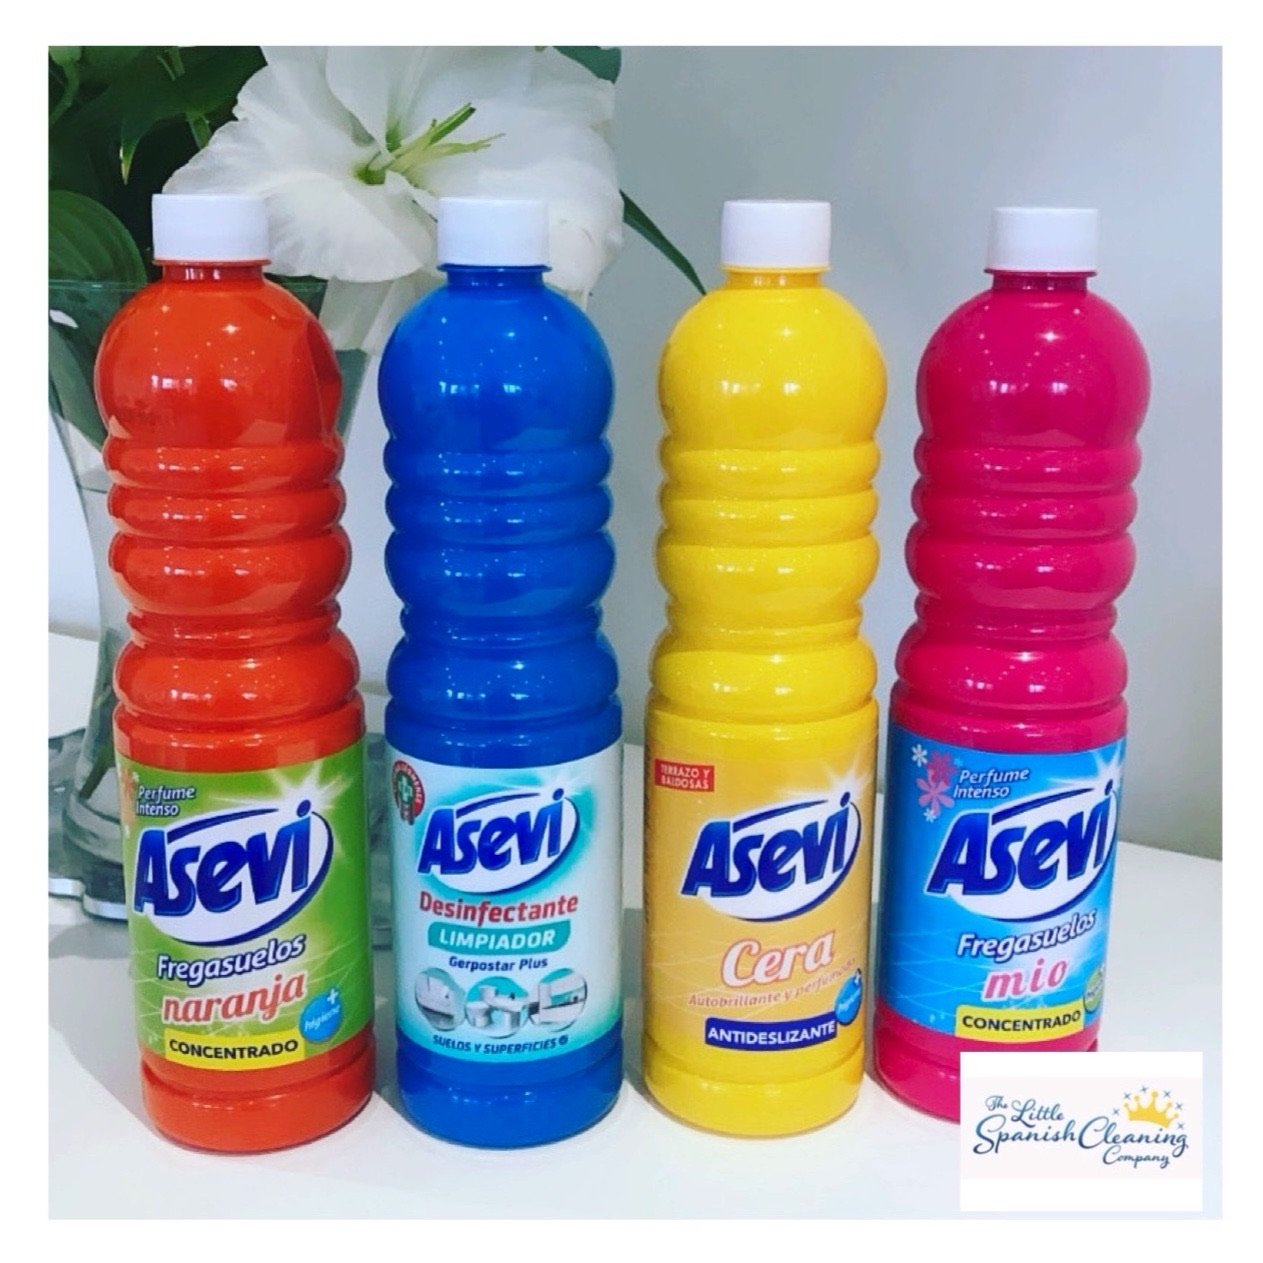 Asevi PET Spanish Floor Cleaner (2 x 1L) Mascotas Concentrated Cleaning  Products